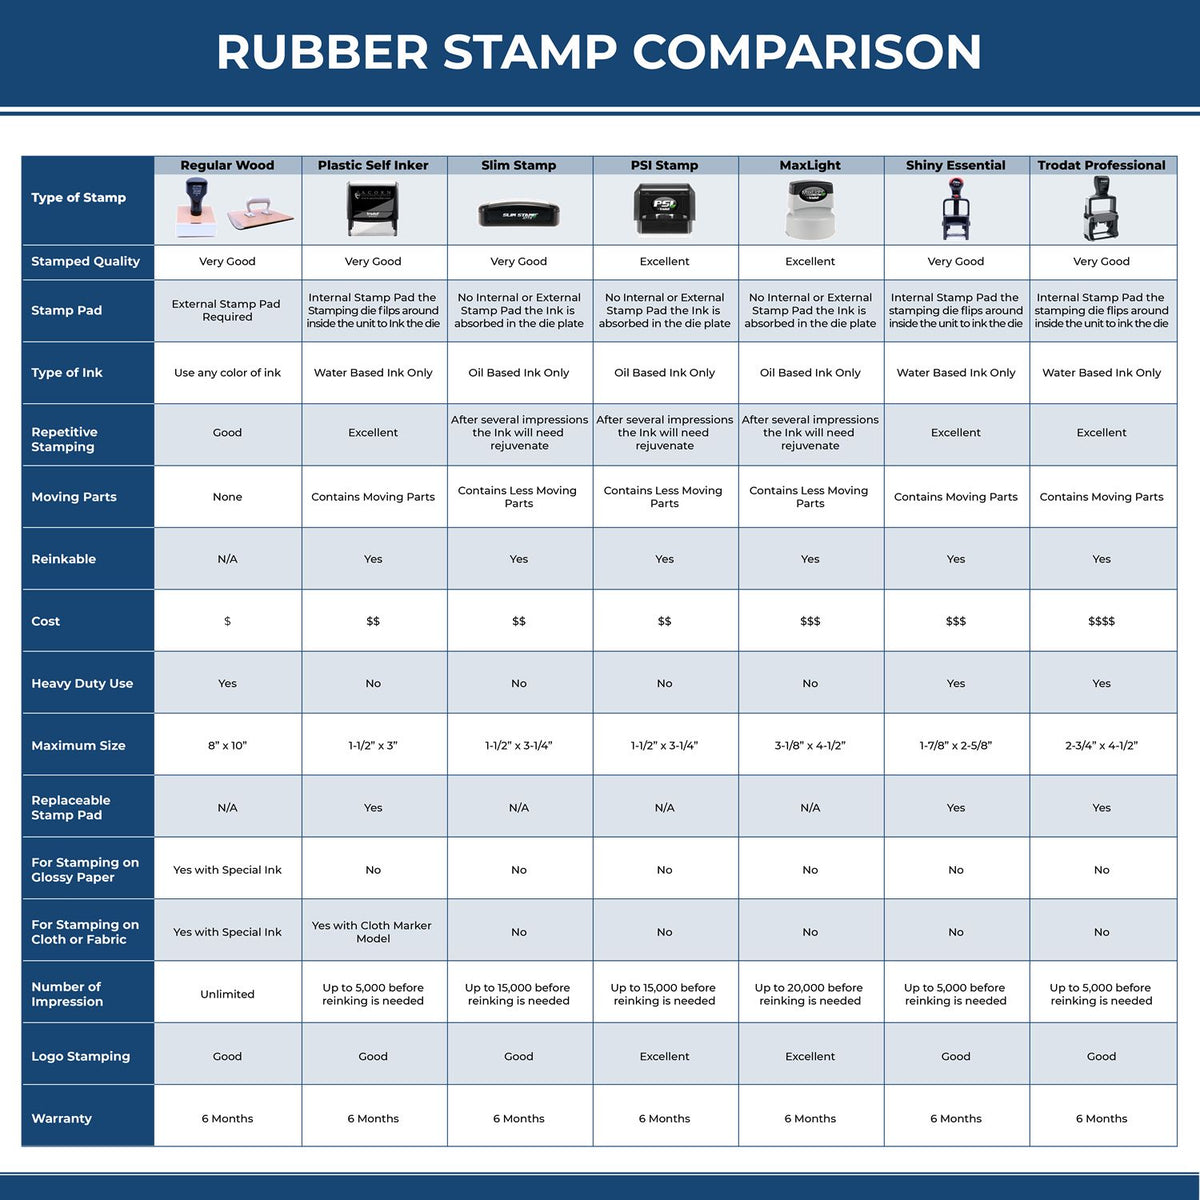 Large Self-Inking Paid with Ck No Stamp Stamp 5635S Rubber Stamp Comparison